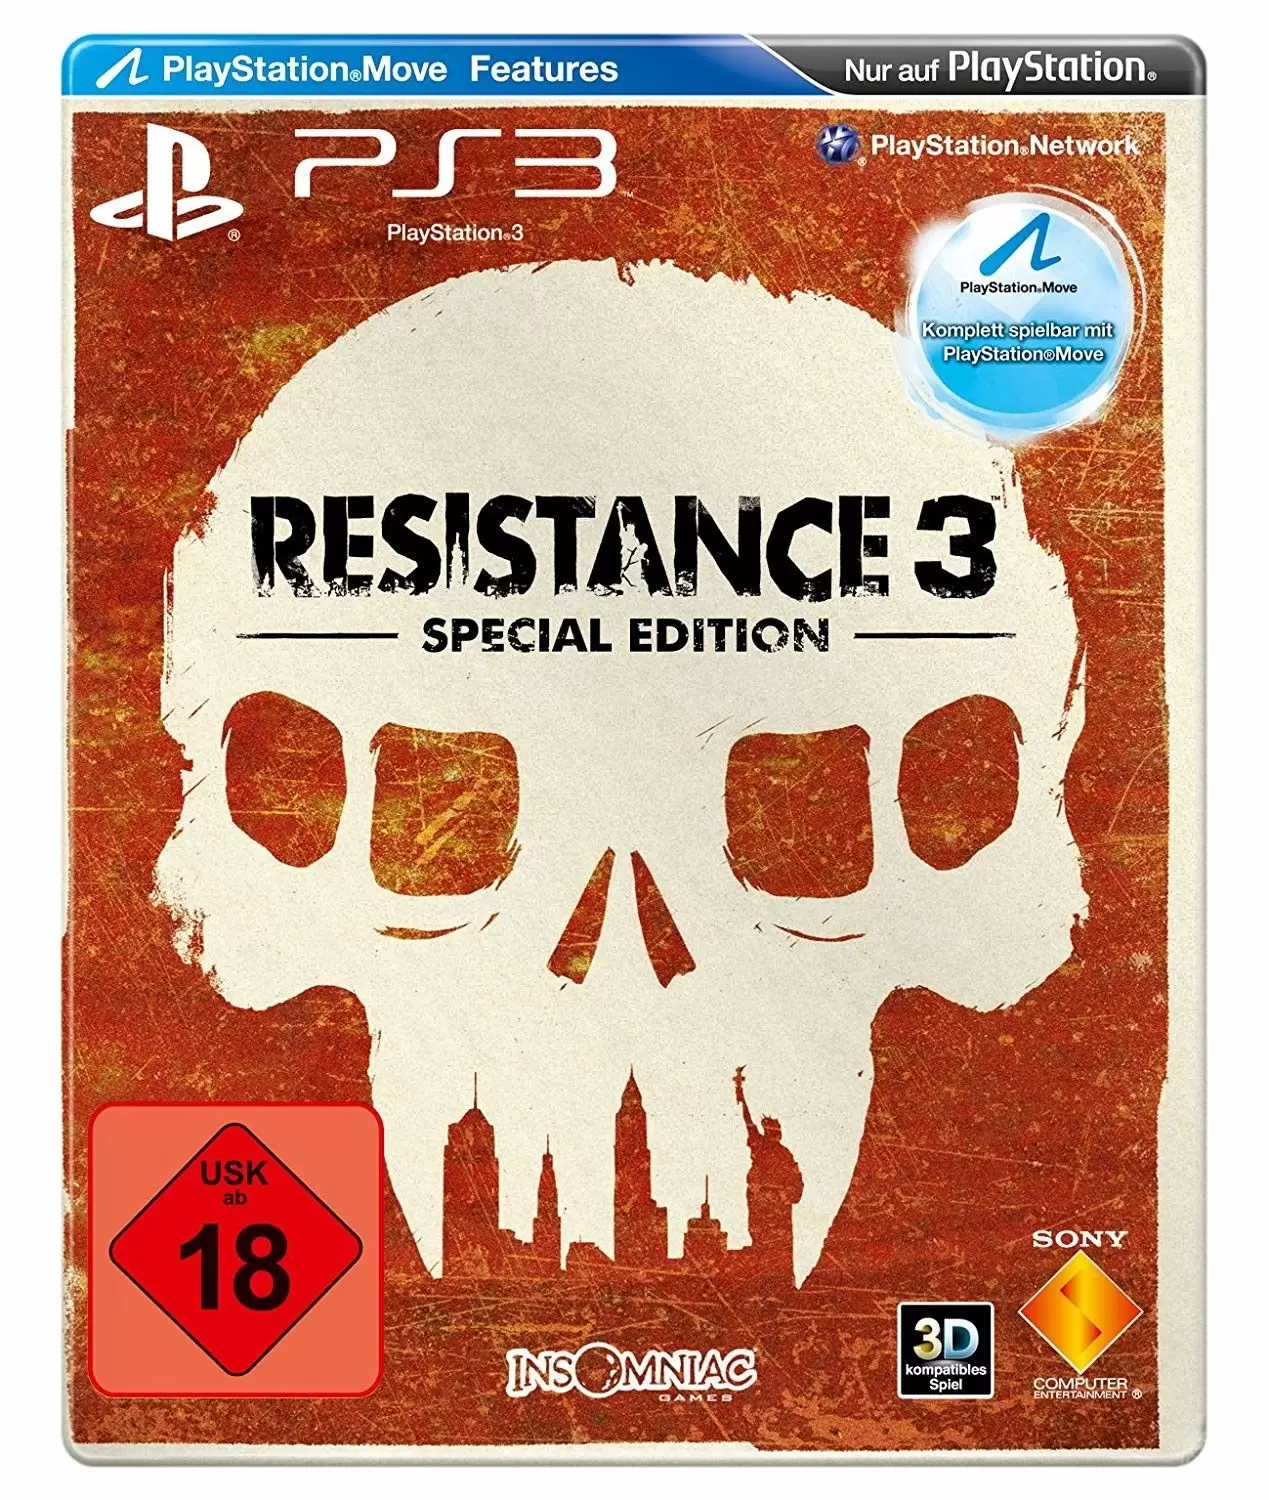 PS3 Games - Resistance 3 - Special Edition